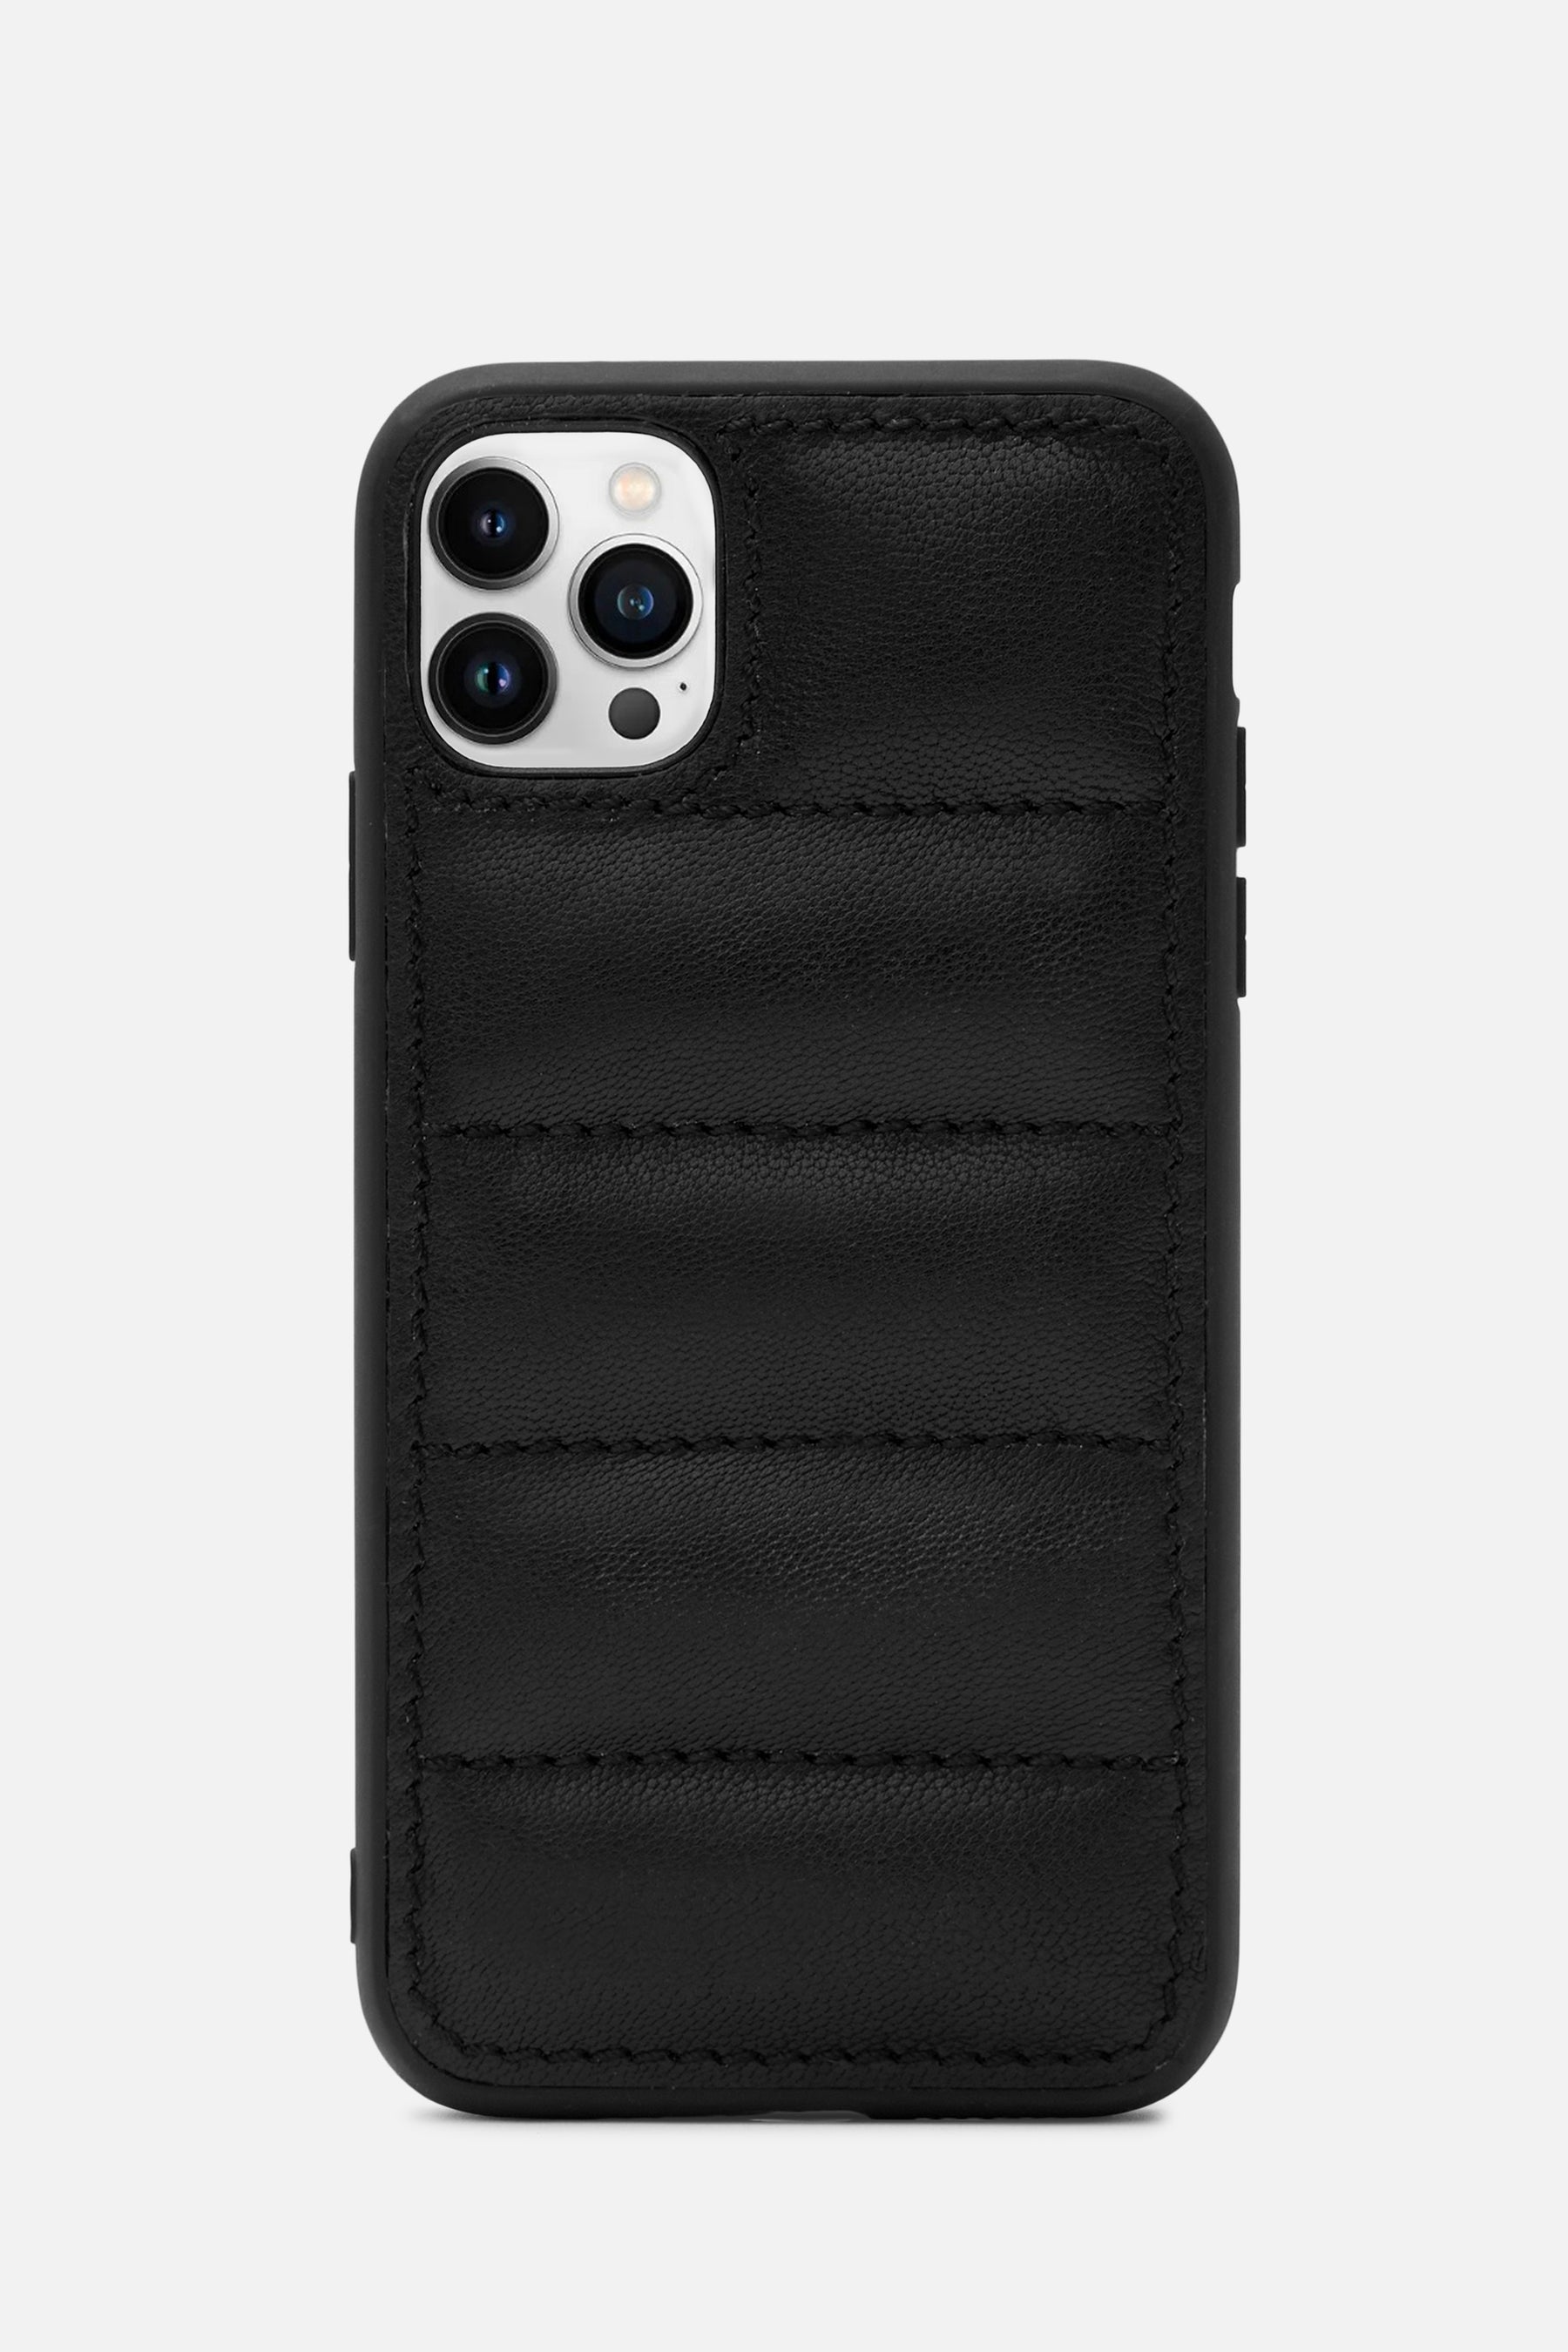 Louis Vuitton Phone cases for Women, Black Friday Sale & Deals up to 21%  off